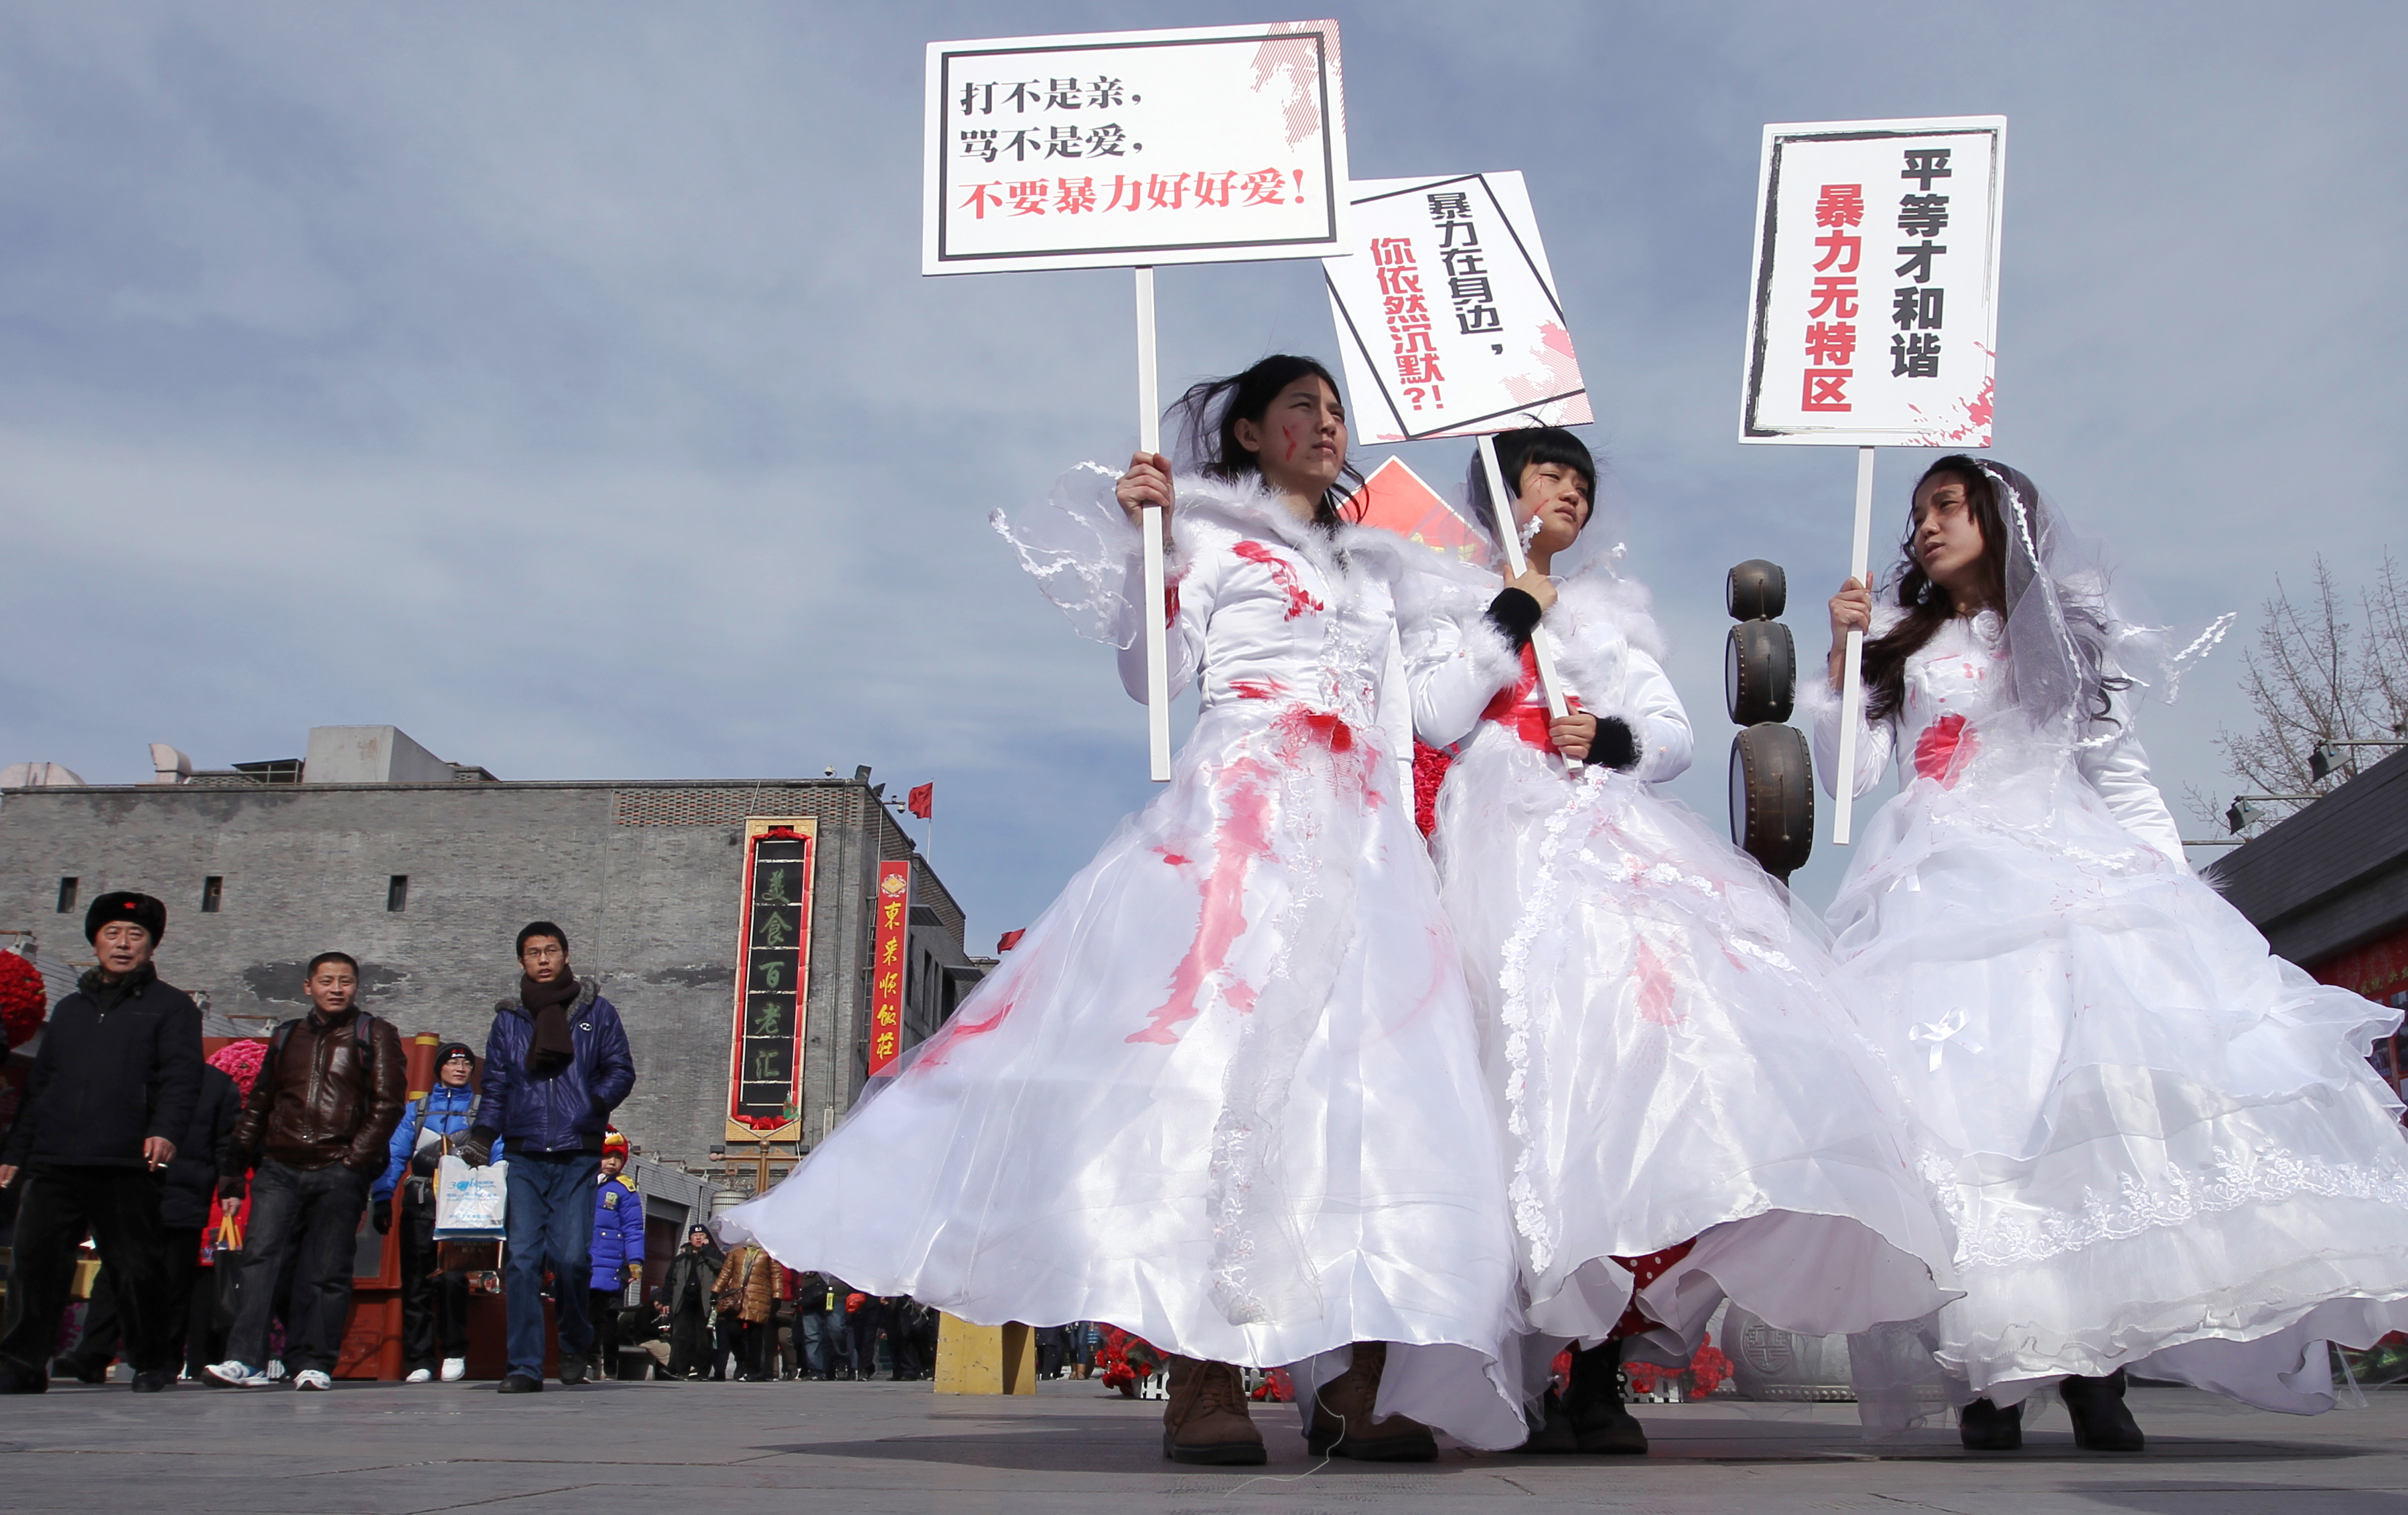 A protest against domestic violence in Beijing in 2012 involving Li Tingting (left) and Wei Tingting (right), two of the activists now detained. Photo: Simon Song